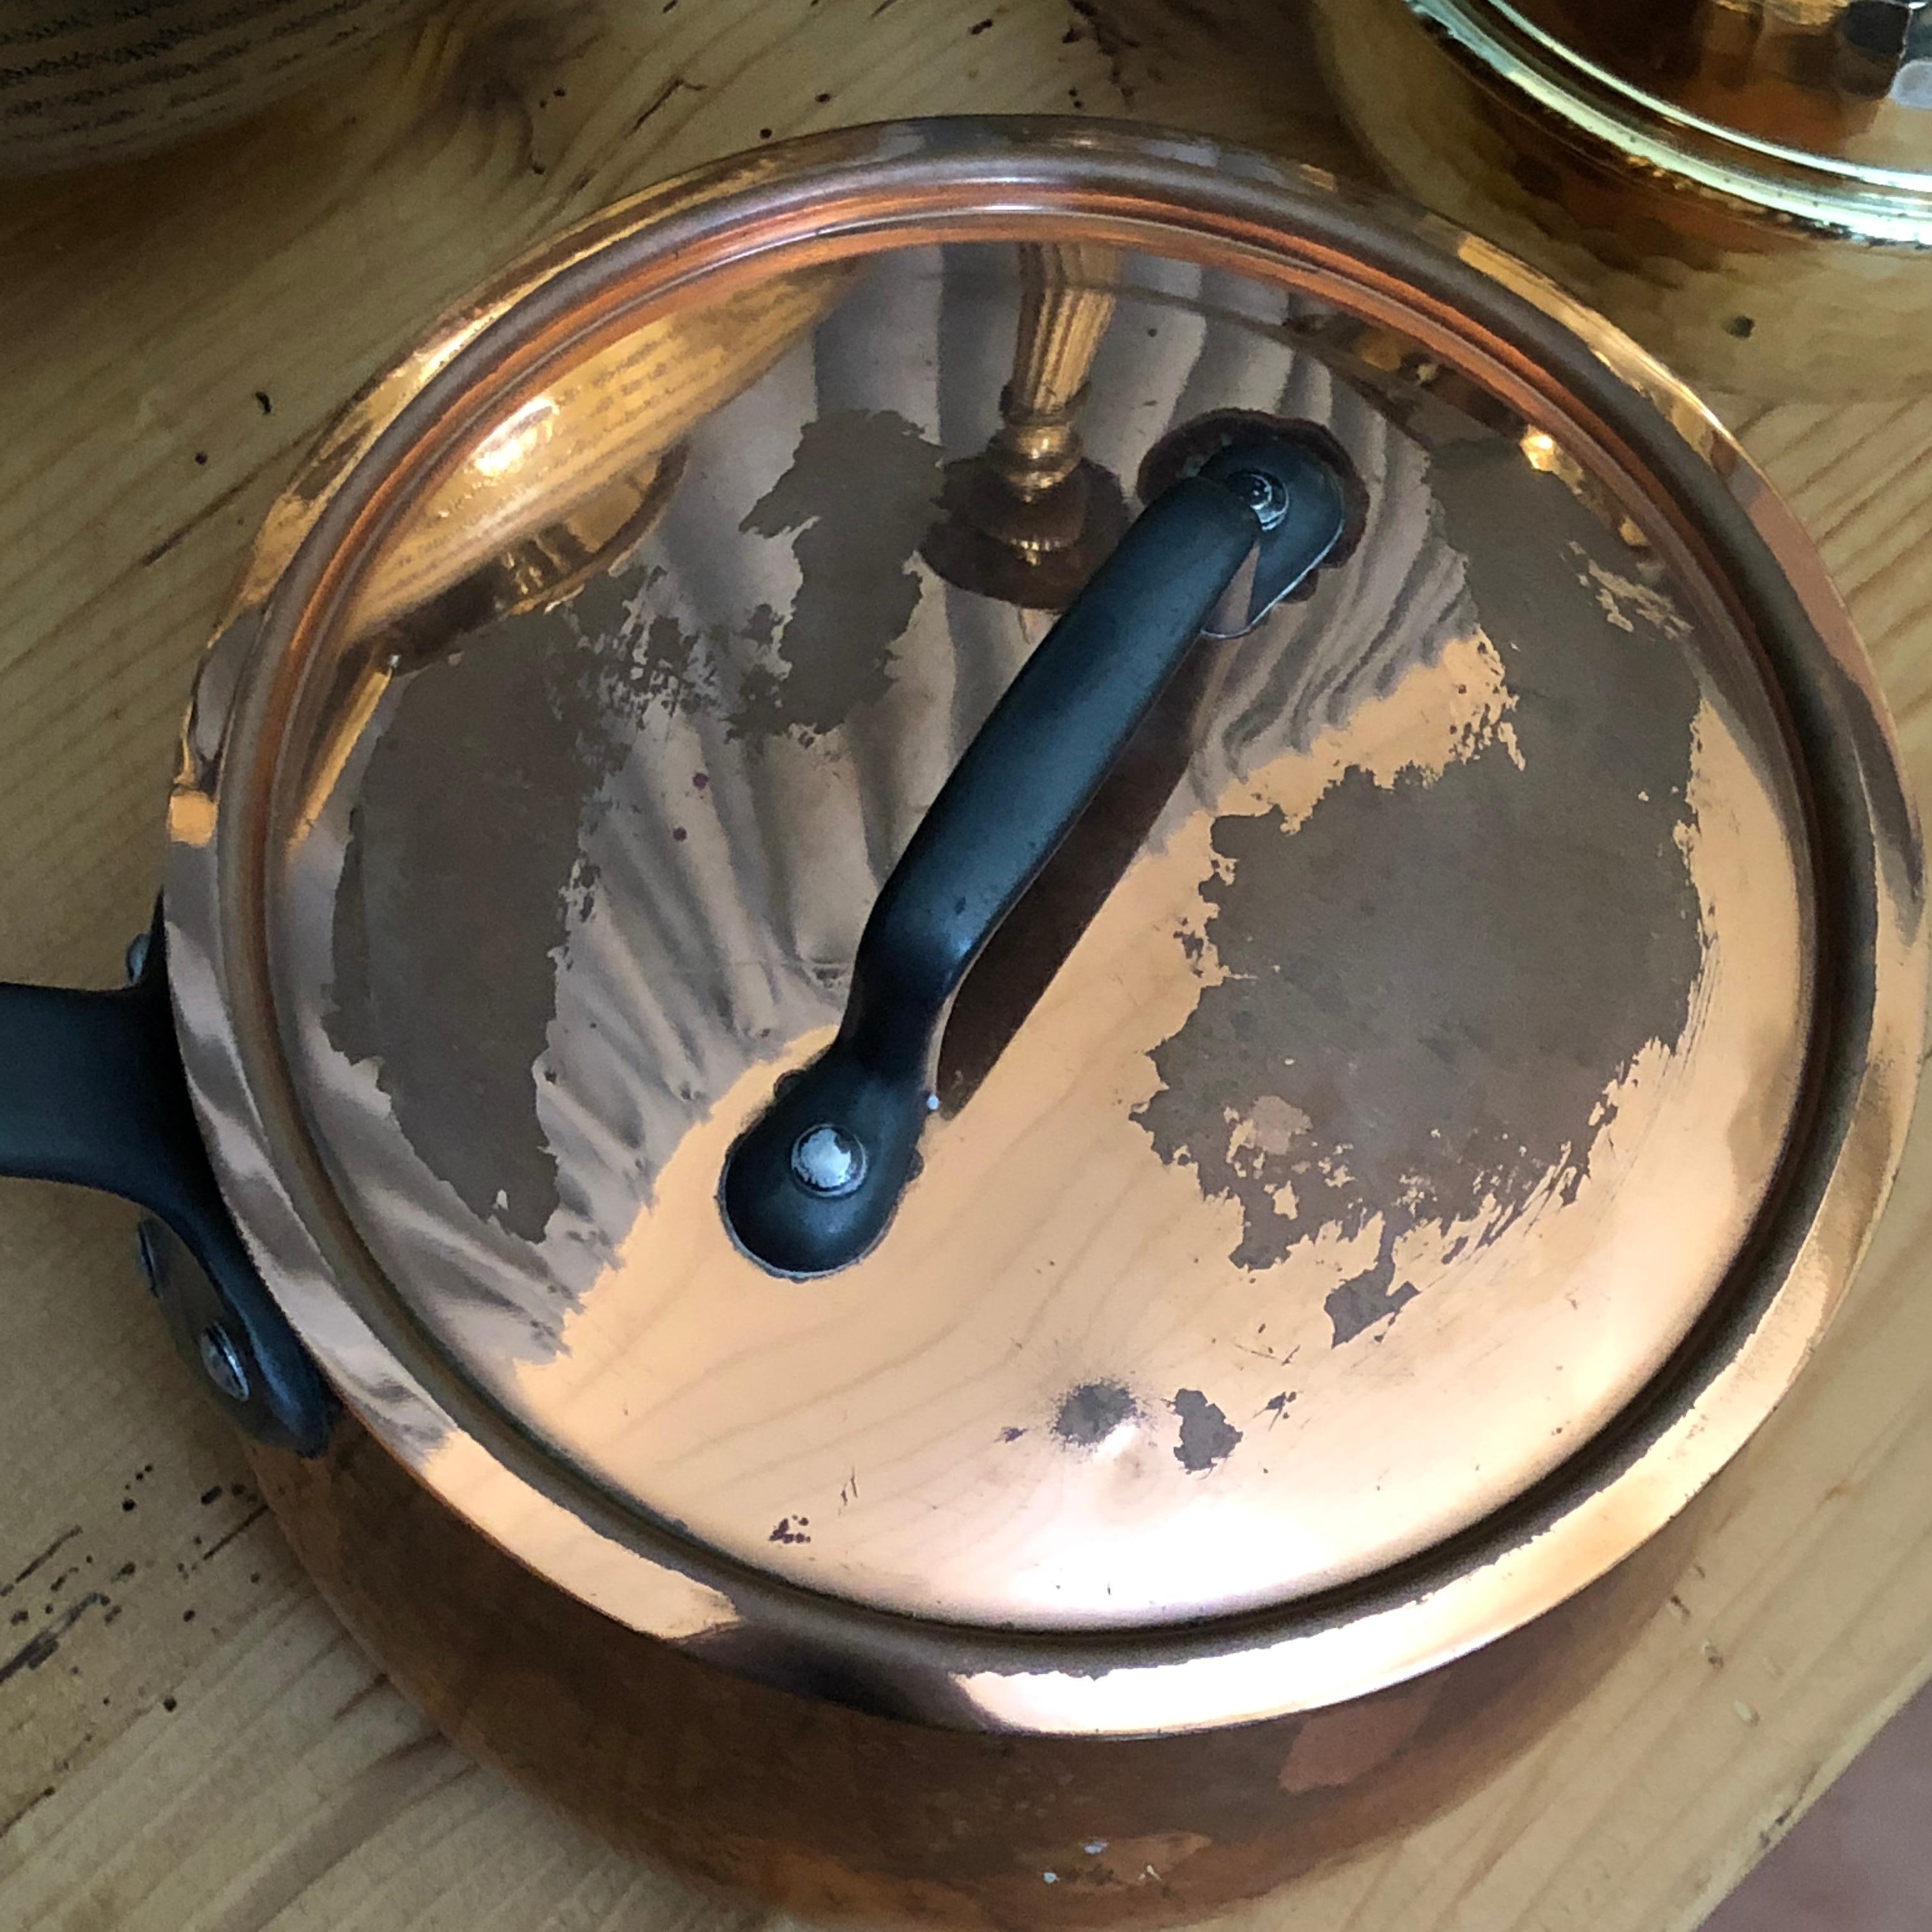 Found in Paris, this collectable antique French copper saucepan remains in wonderful un-restored condition. The copper patina of this pan features a varied aged copper discoloration, a sought after effect of many French Kitchenalia collectors. This